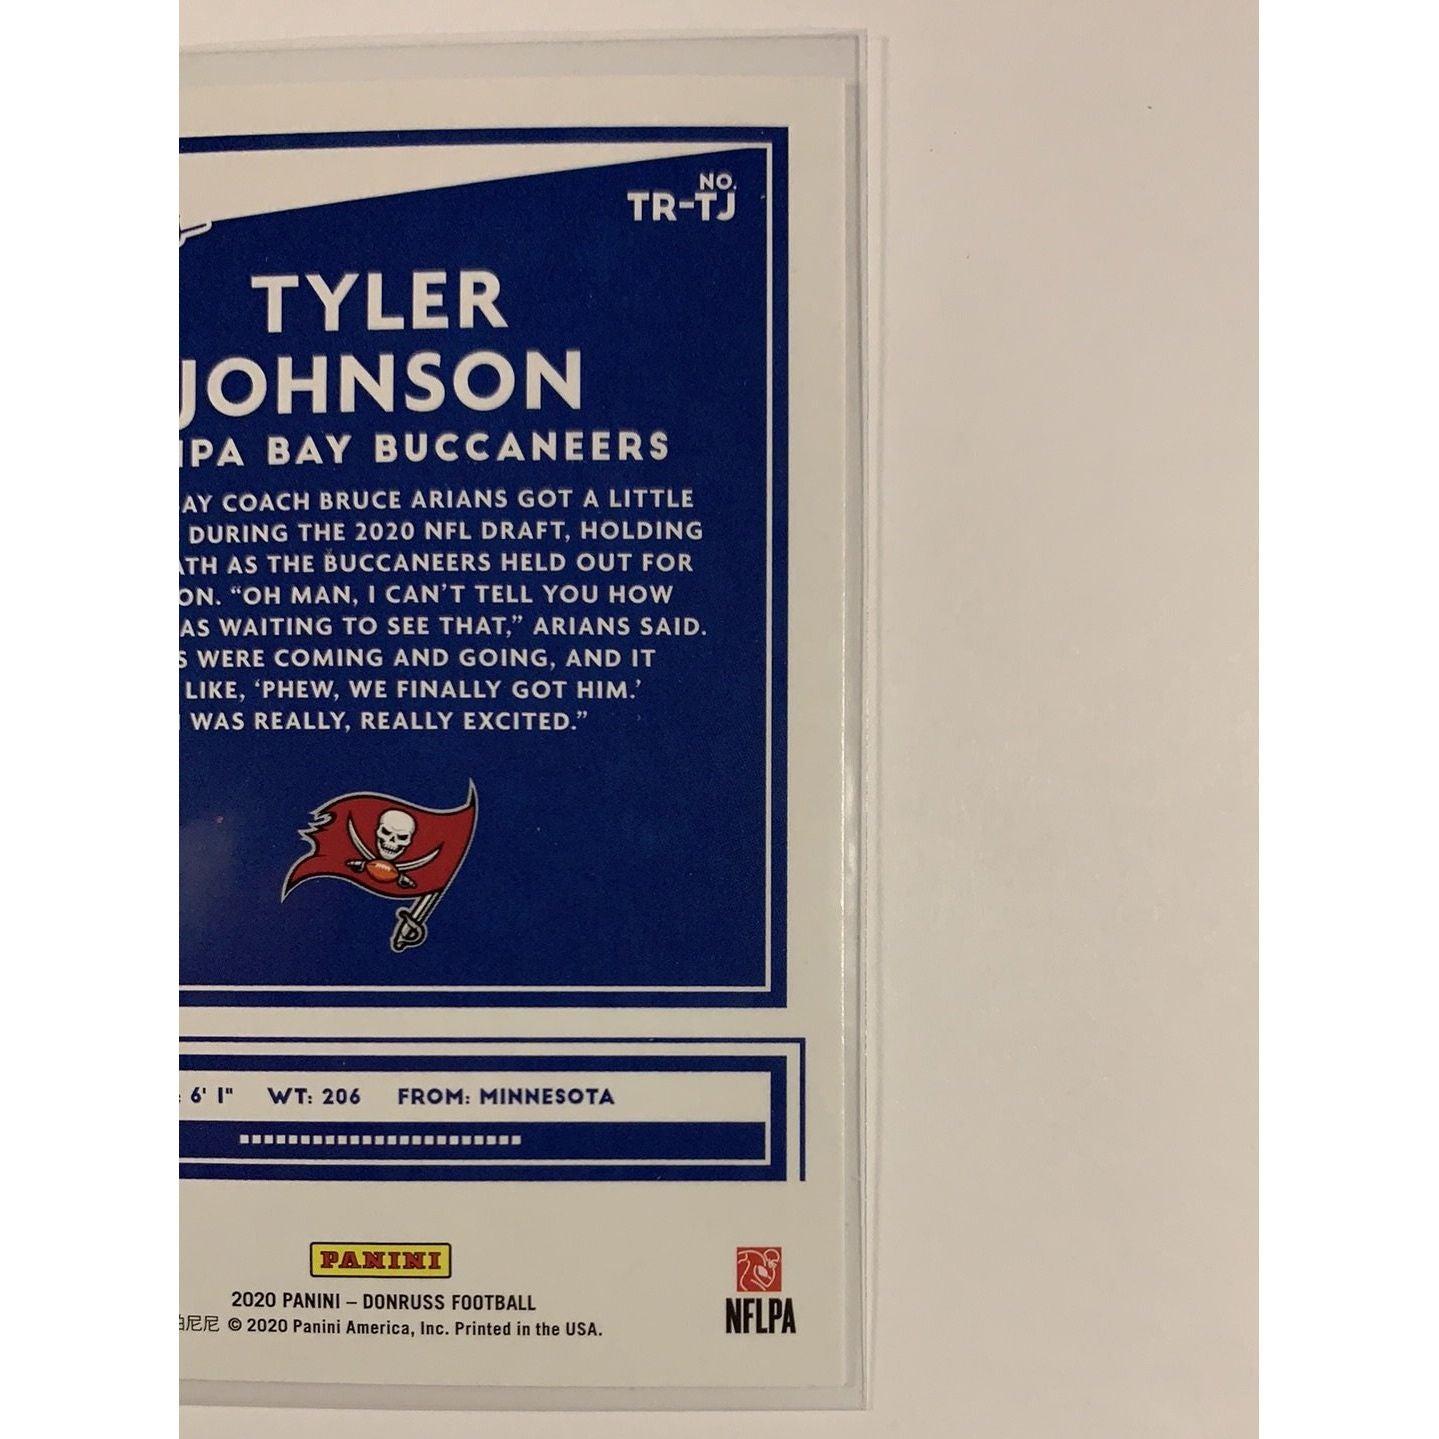  2020 Donruss Tyler Johnson The Rookies Holo Foil  Local Legends Cards & Collectibles